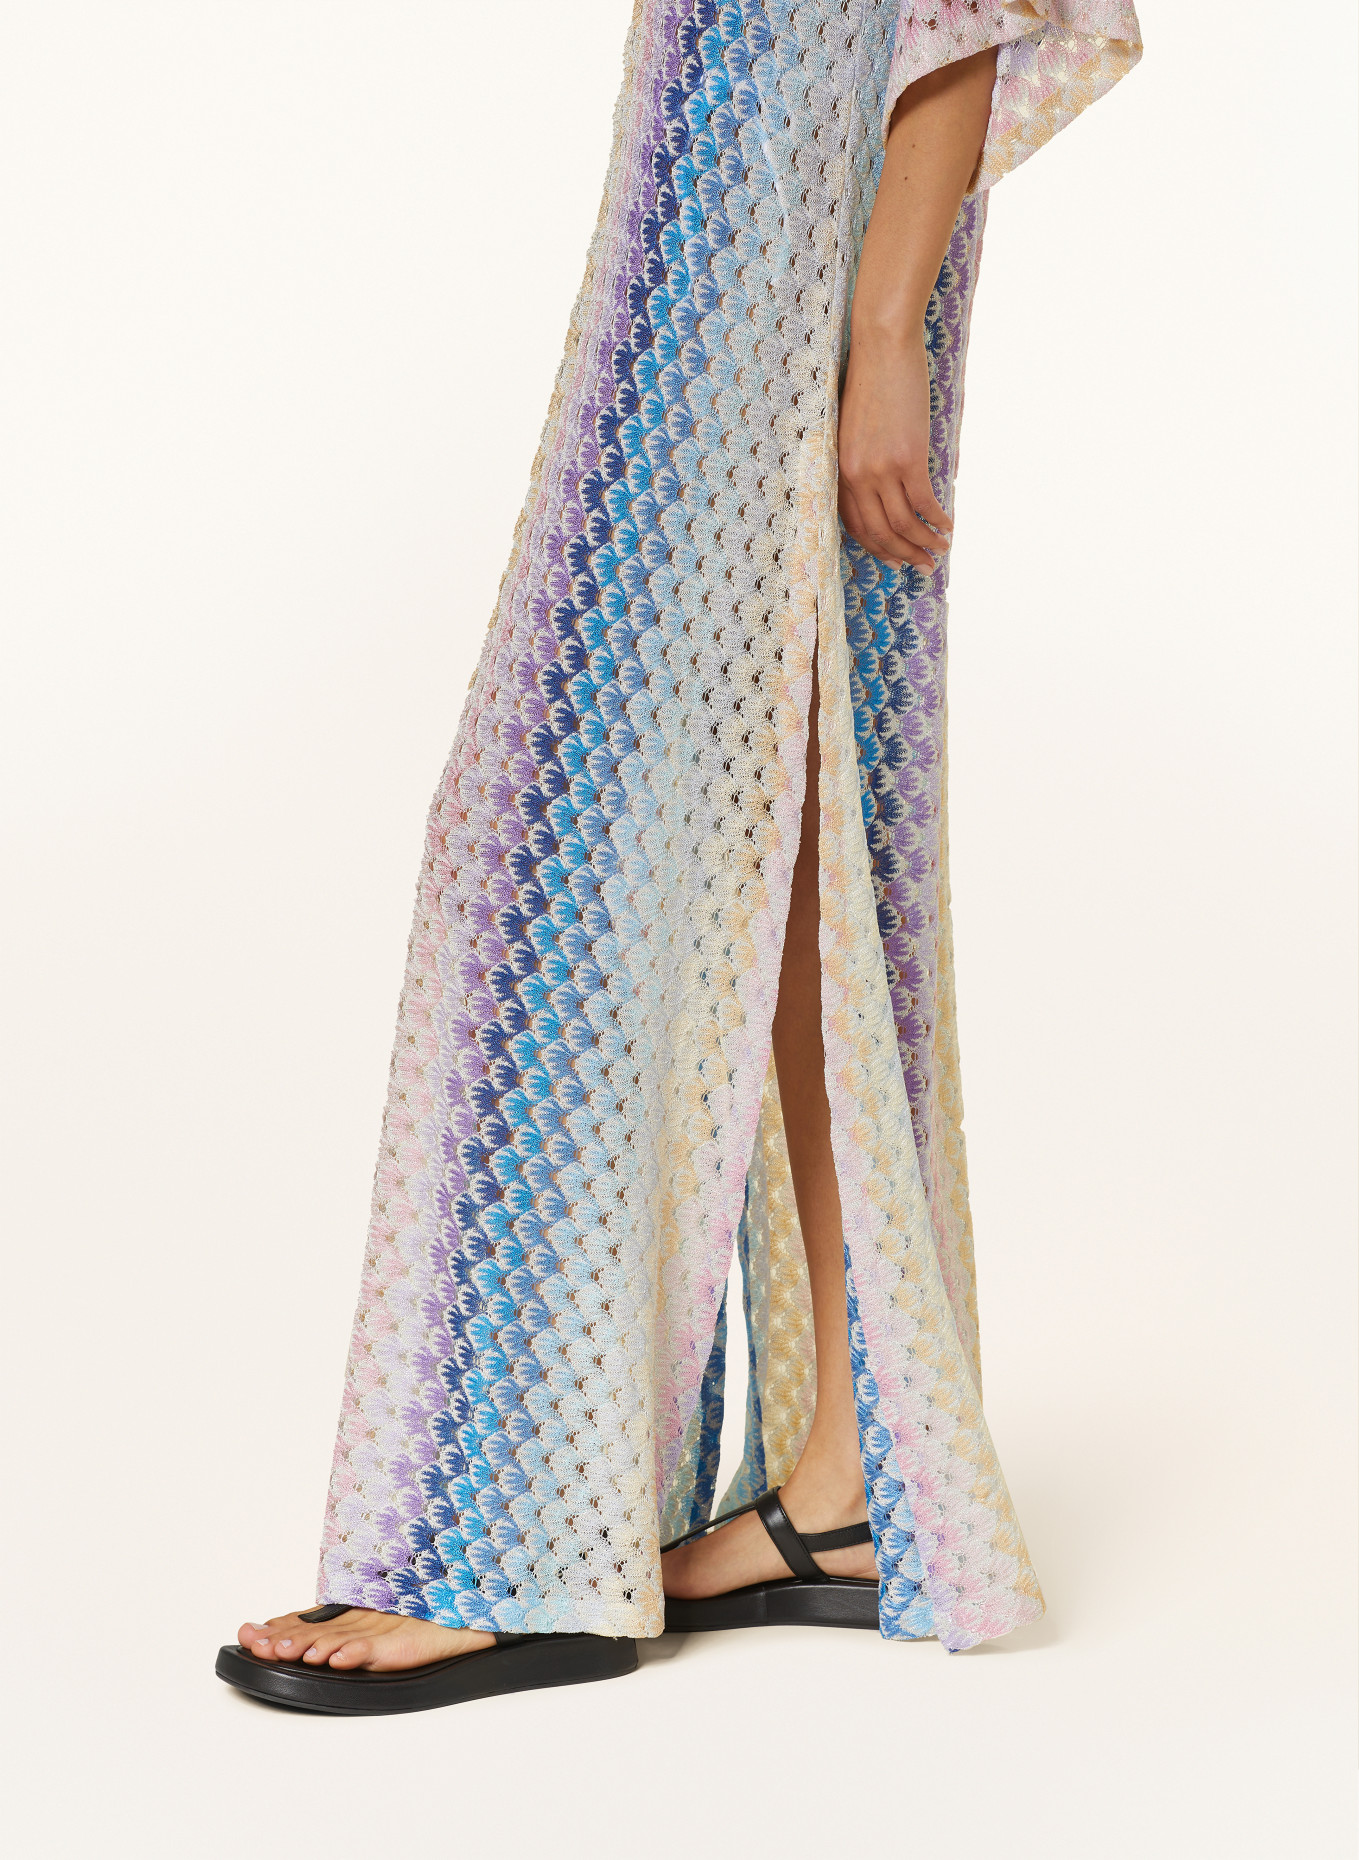 MISSONI Beach dress with 3/4 sleeves and glitter thread, Color: PINK/ PURPLE/ BLUE (Image 4)